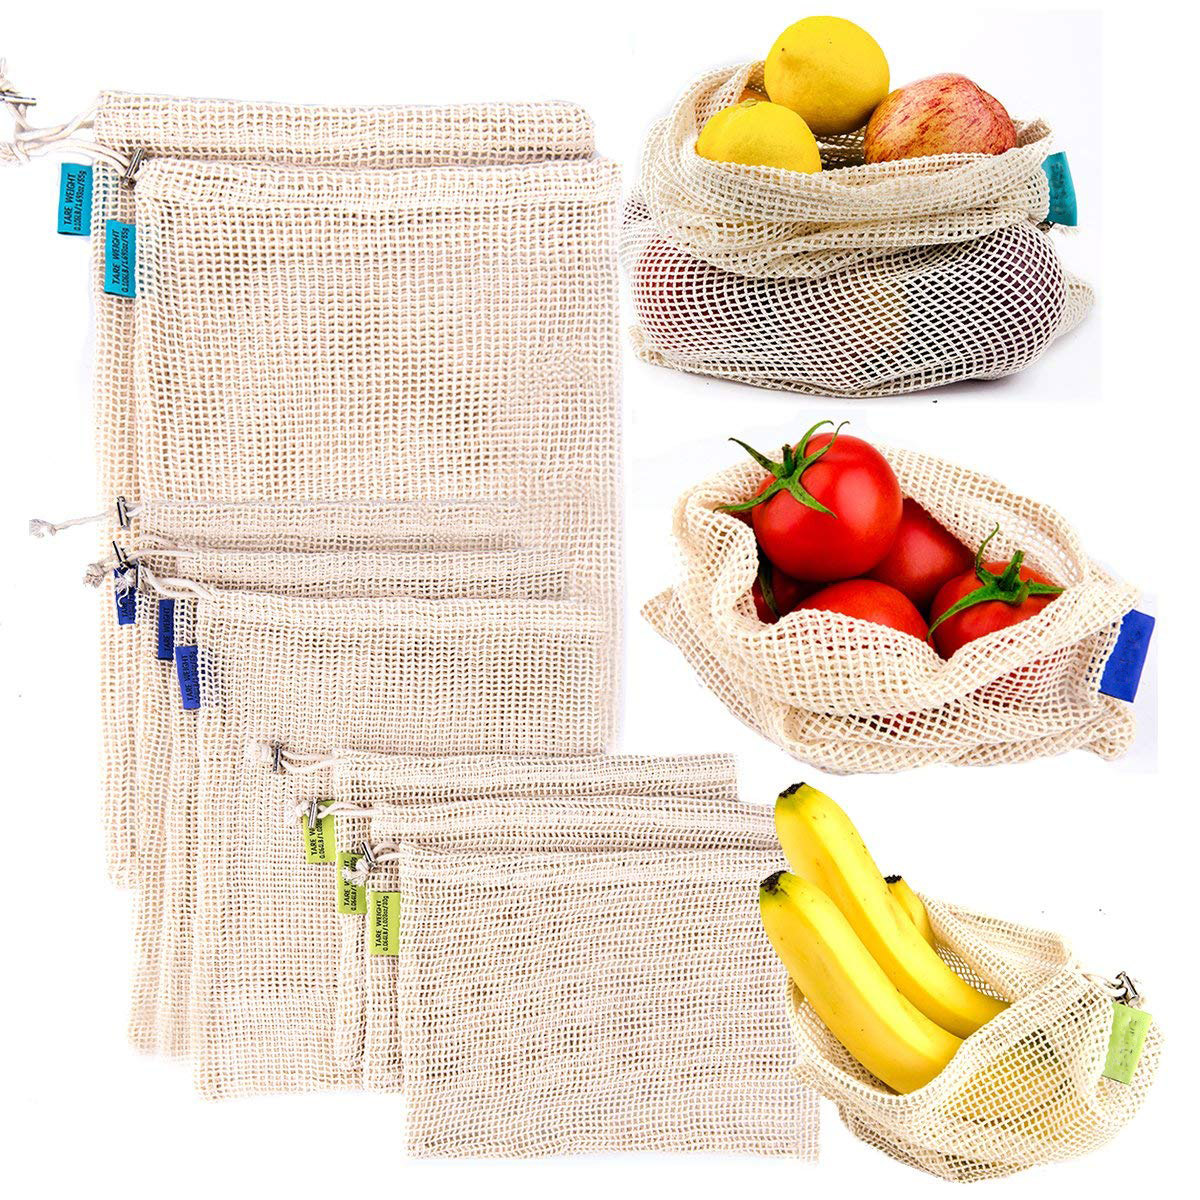 Reusable Produce Mesh Bags,Natural Cotton Eco-Friendly Net Bags with Double-Stitched Seams for Grocery Shopping Storage of Fruit Vegetable Garden Produce (3 size: Small - Medium - Large) 